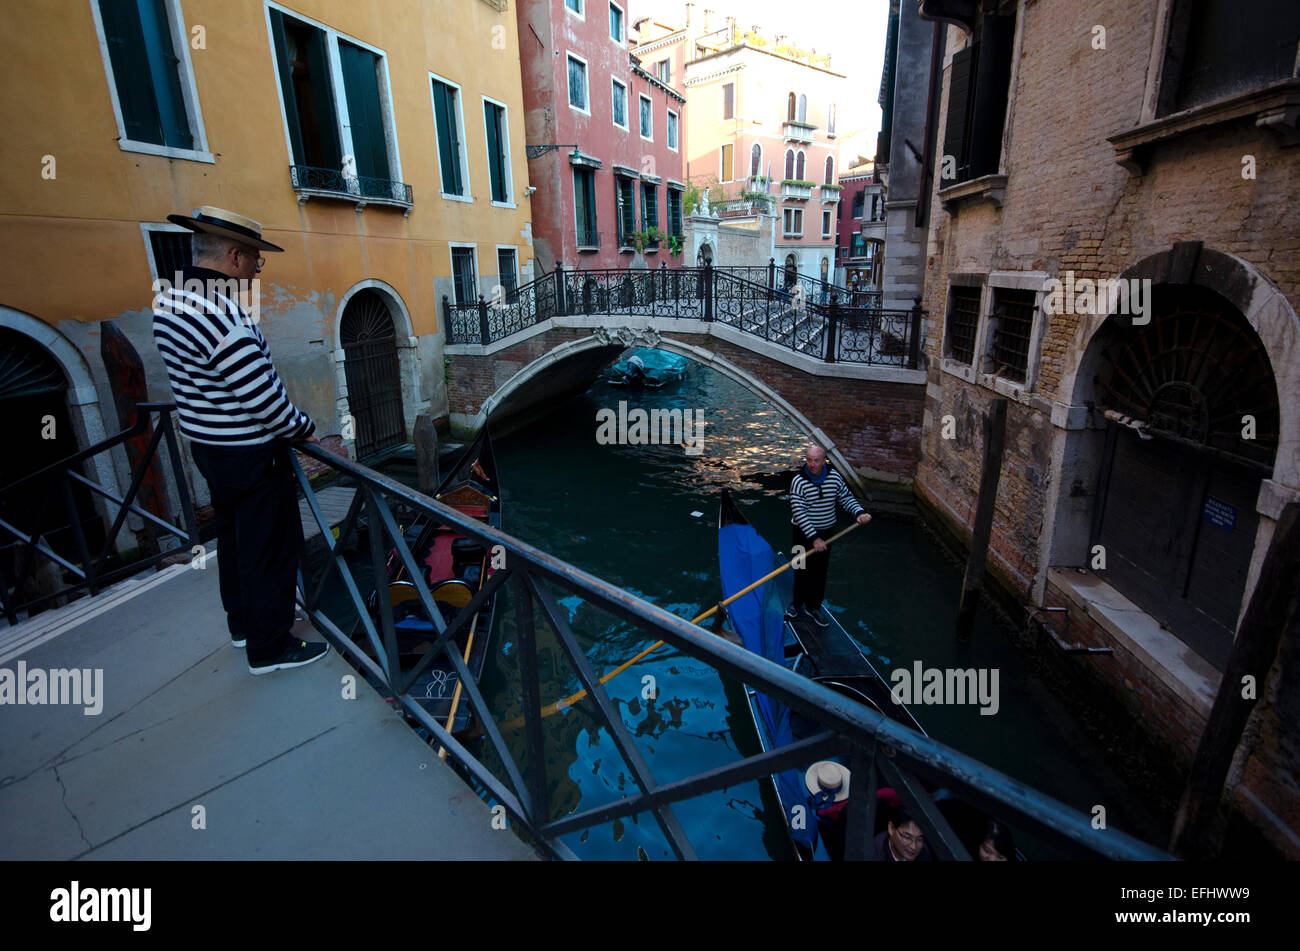 Gondolier on bridge with a gondola going underneath it in Venice, Italy Stock Photo